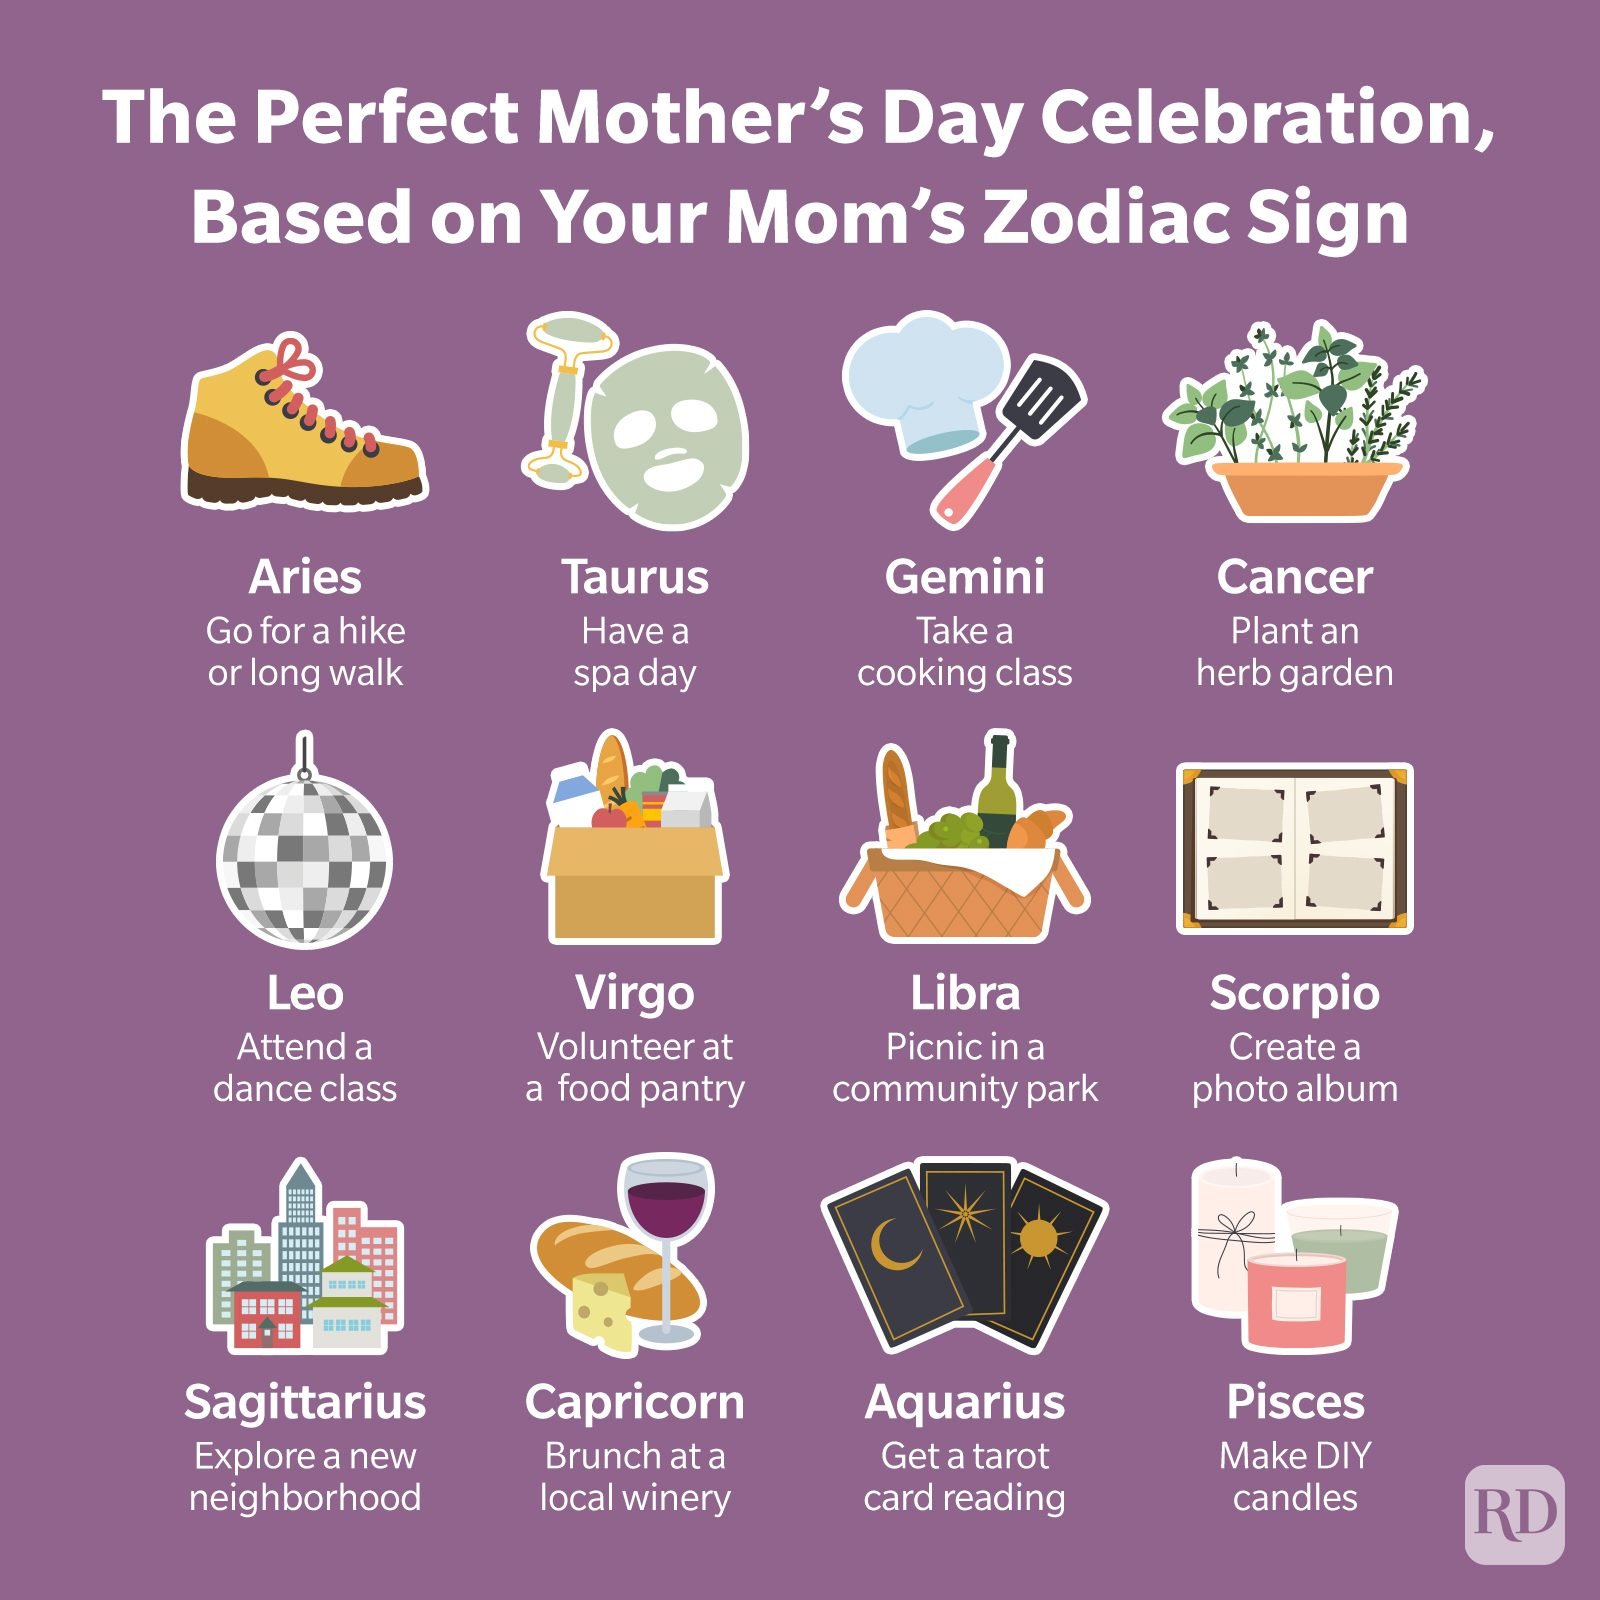 The Best Mother's Day Celebration, Based on Your Mom's Zodiac Sign